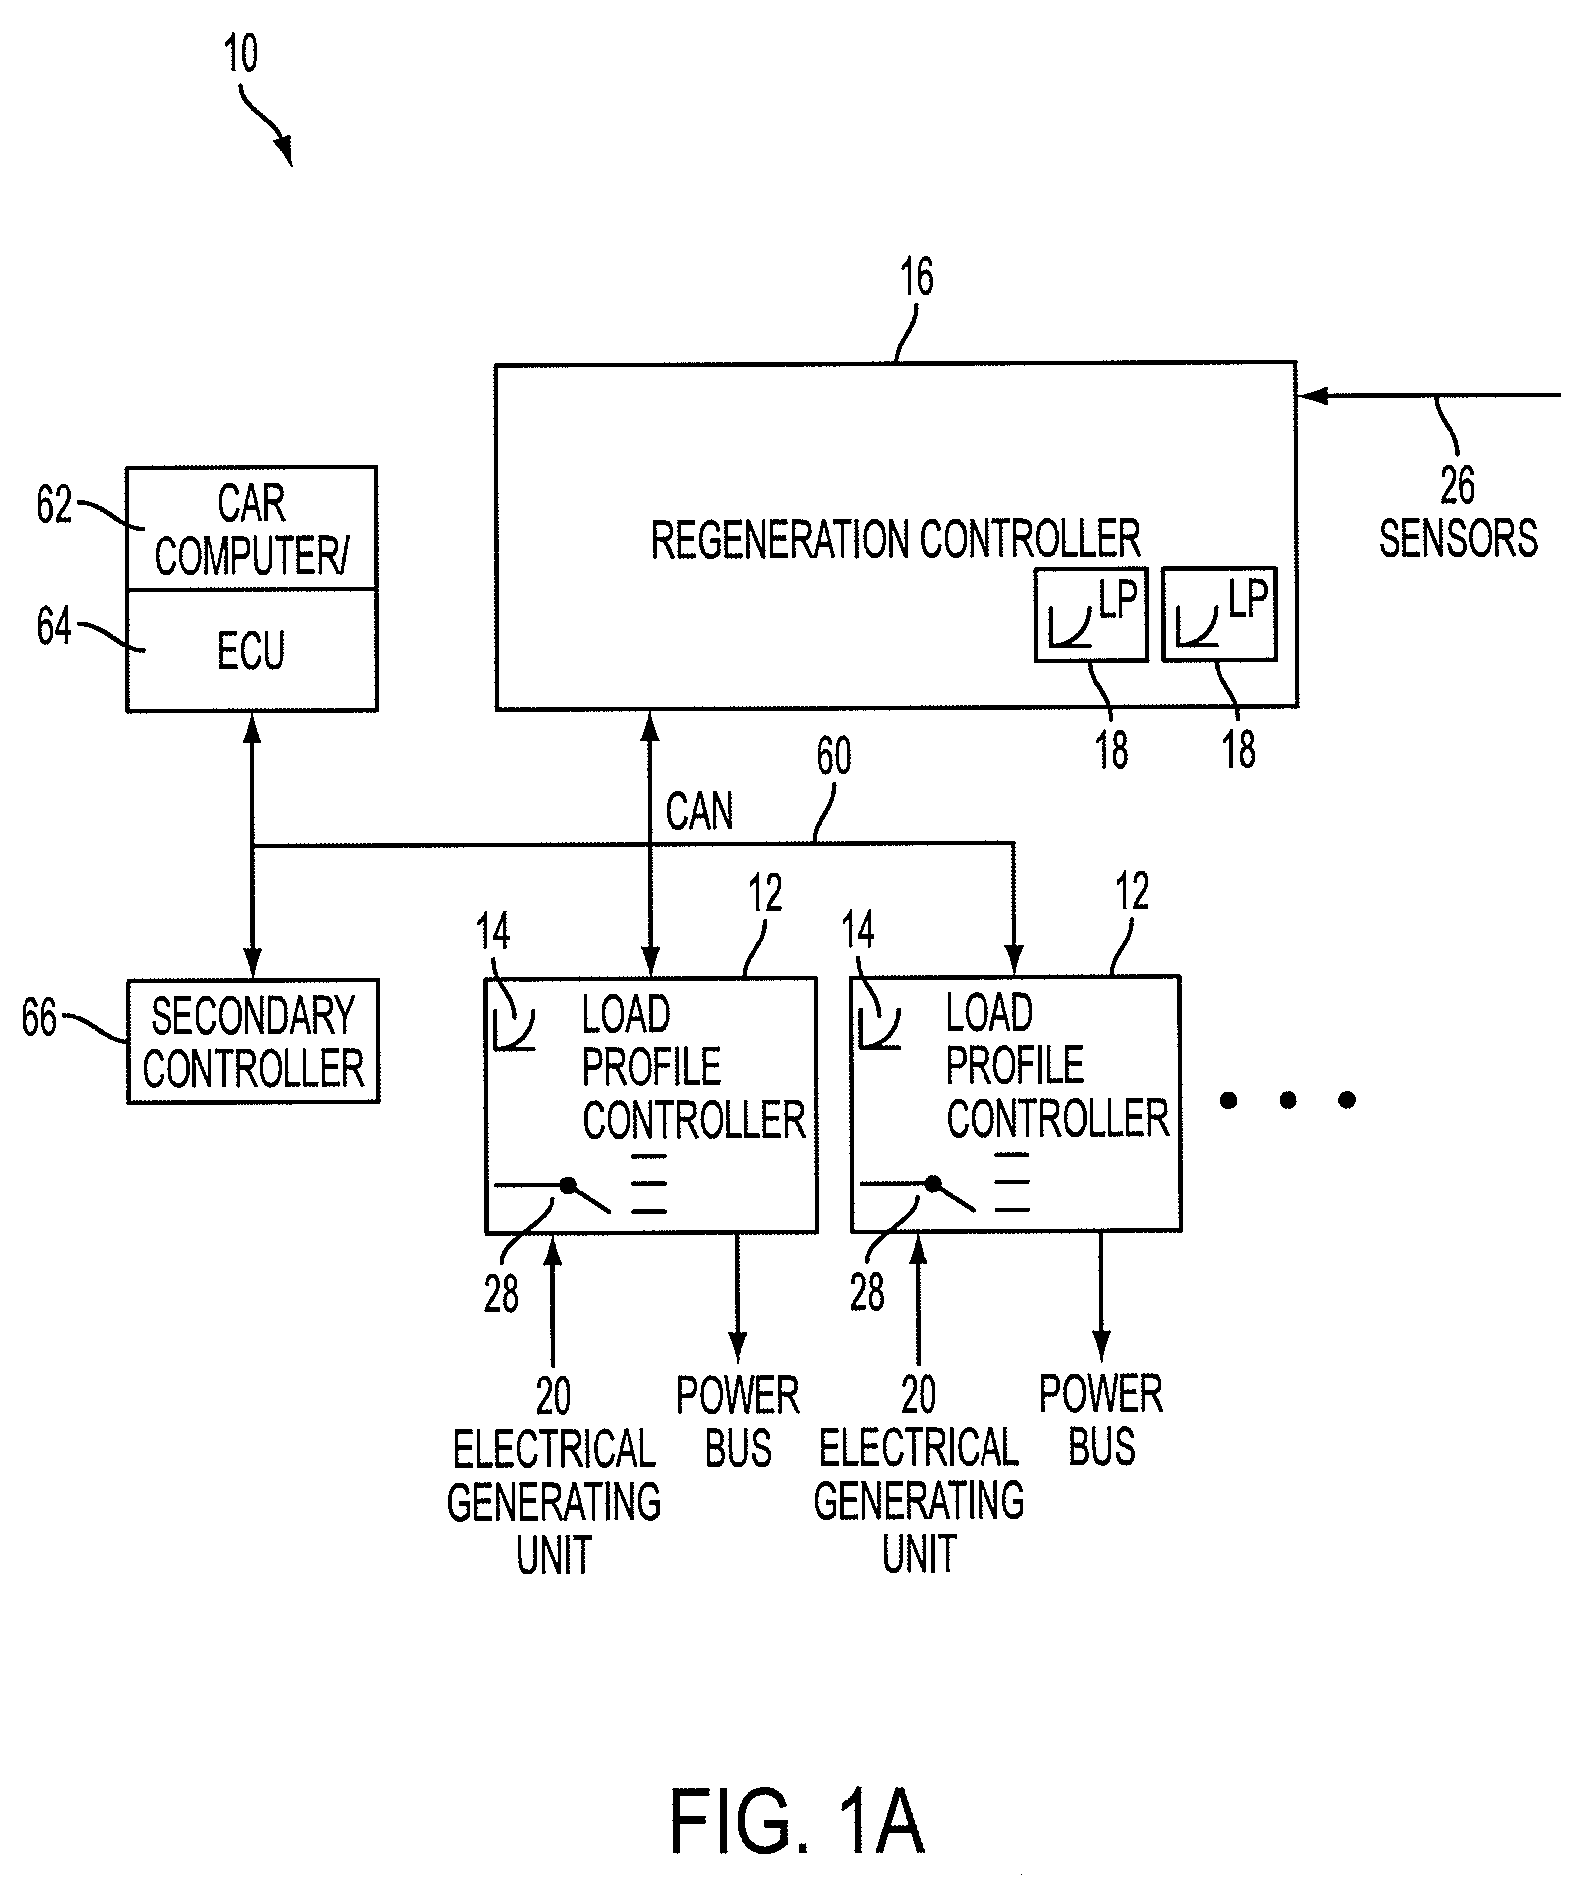 System and method for control for regenerative energy generators